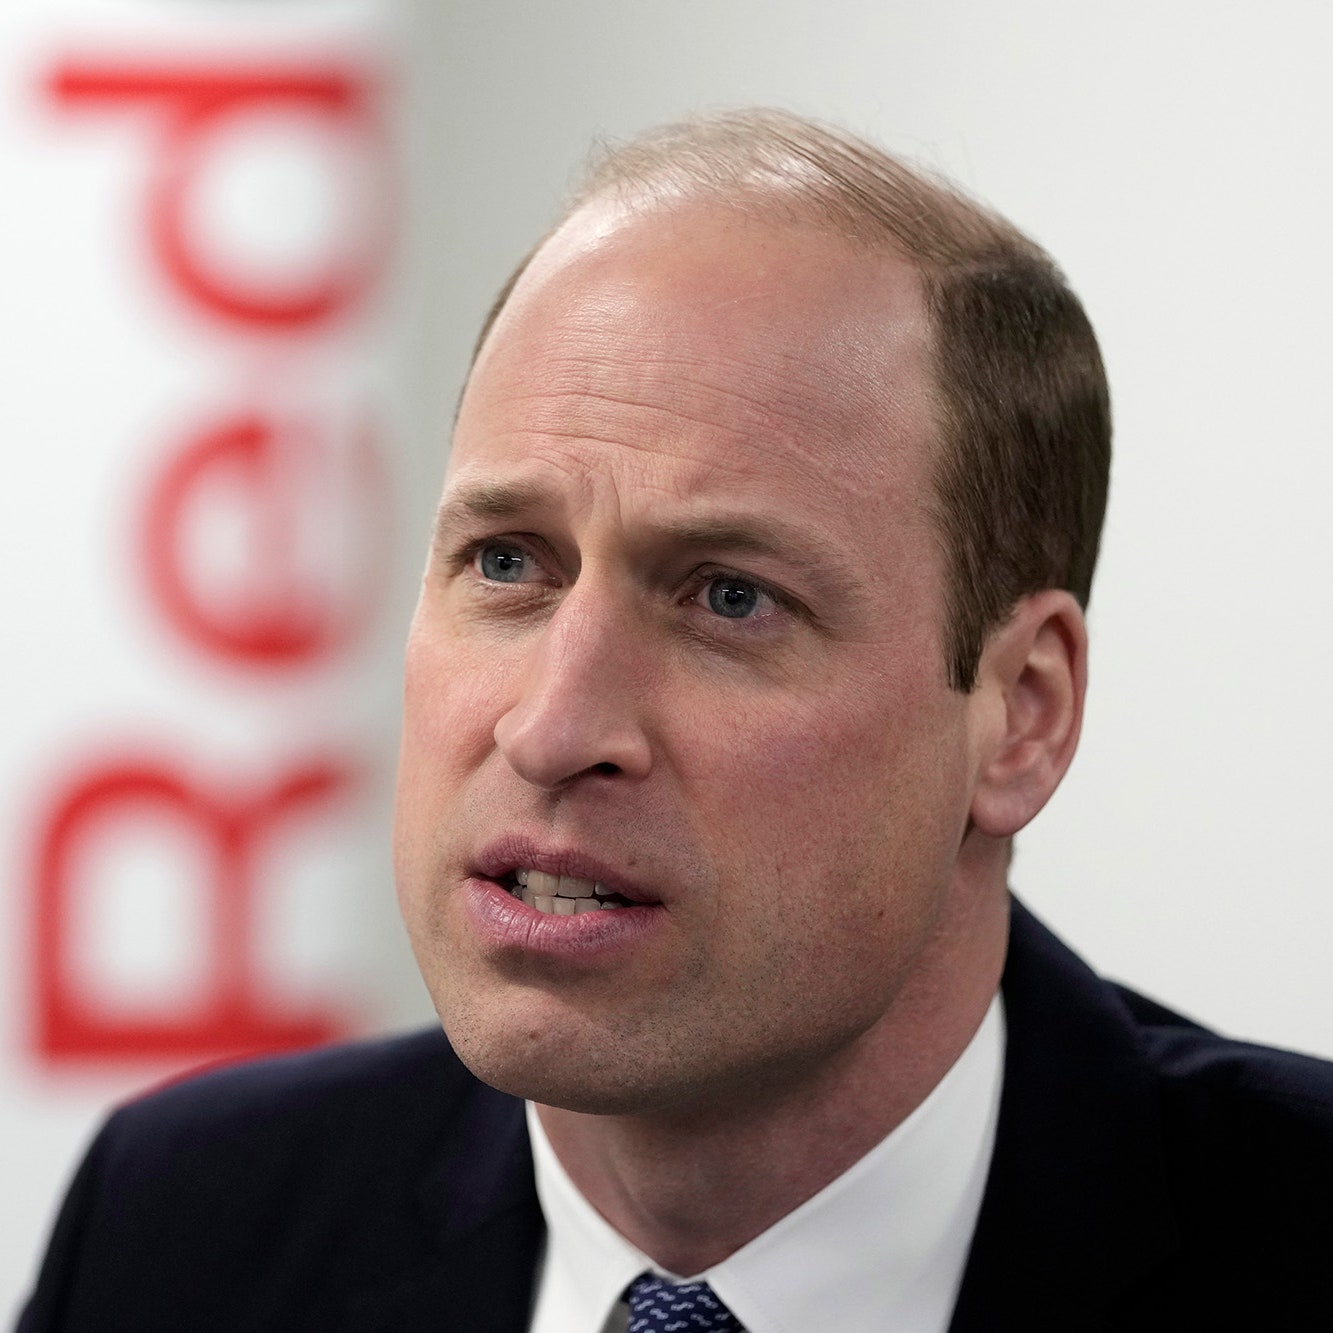 Prince William Wants to “See an End to the Fighting” in Gaza